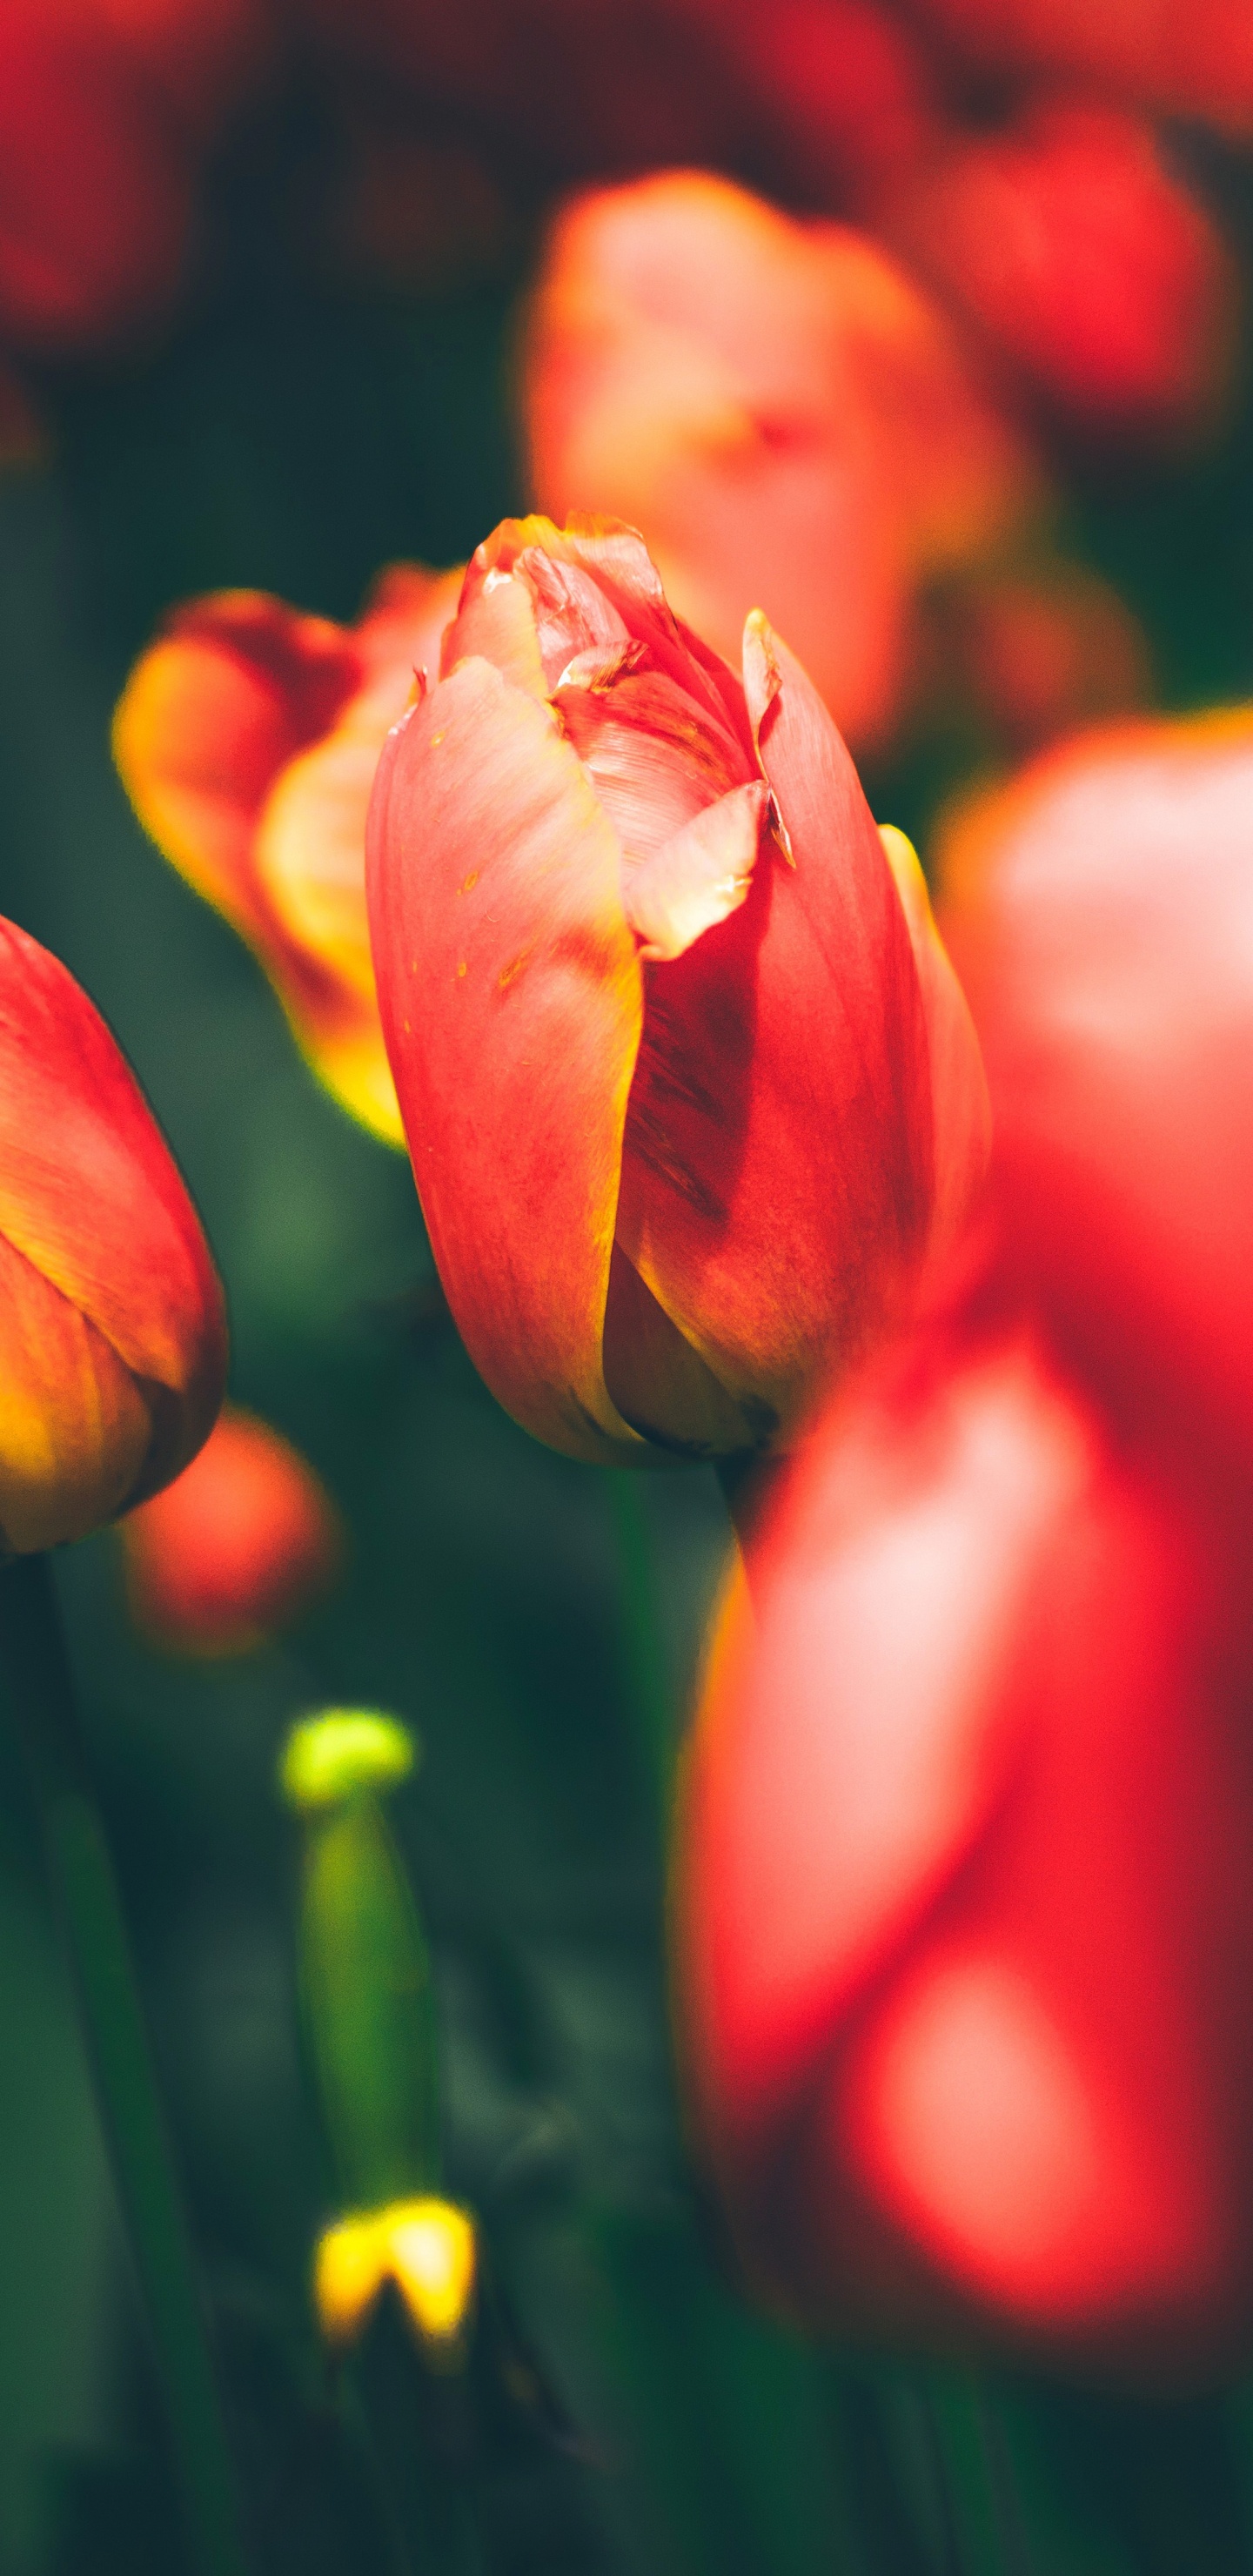 Red Tulips in Bloom During Daytime. Wallpaper in 1440x2960 Resolution